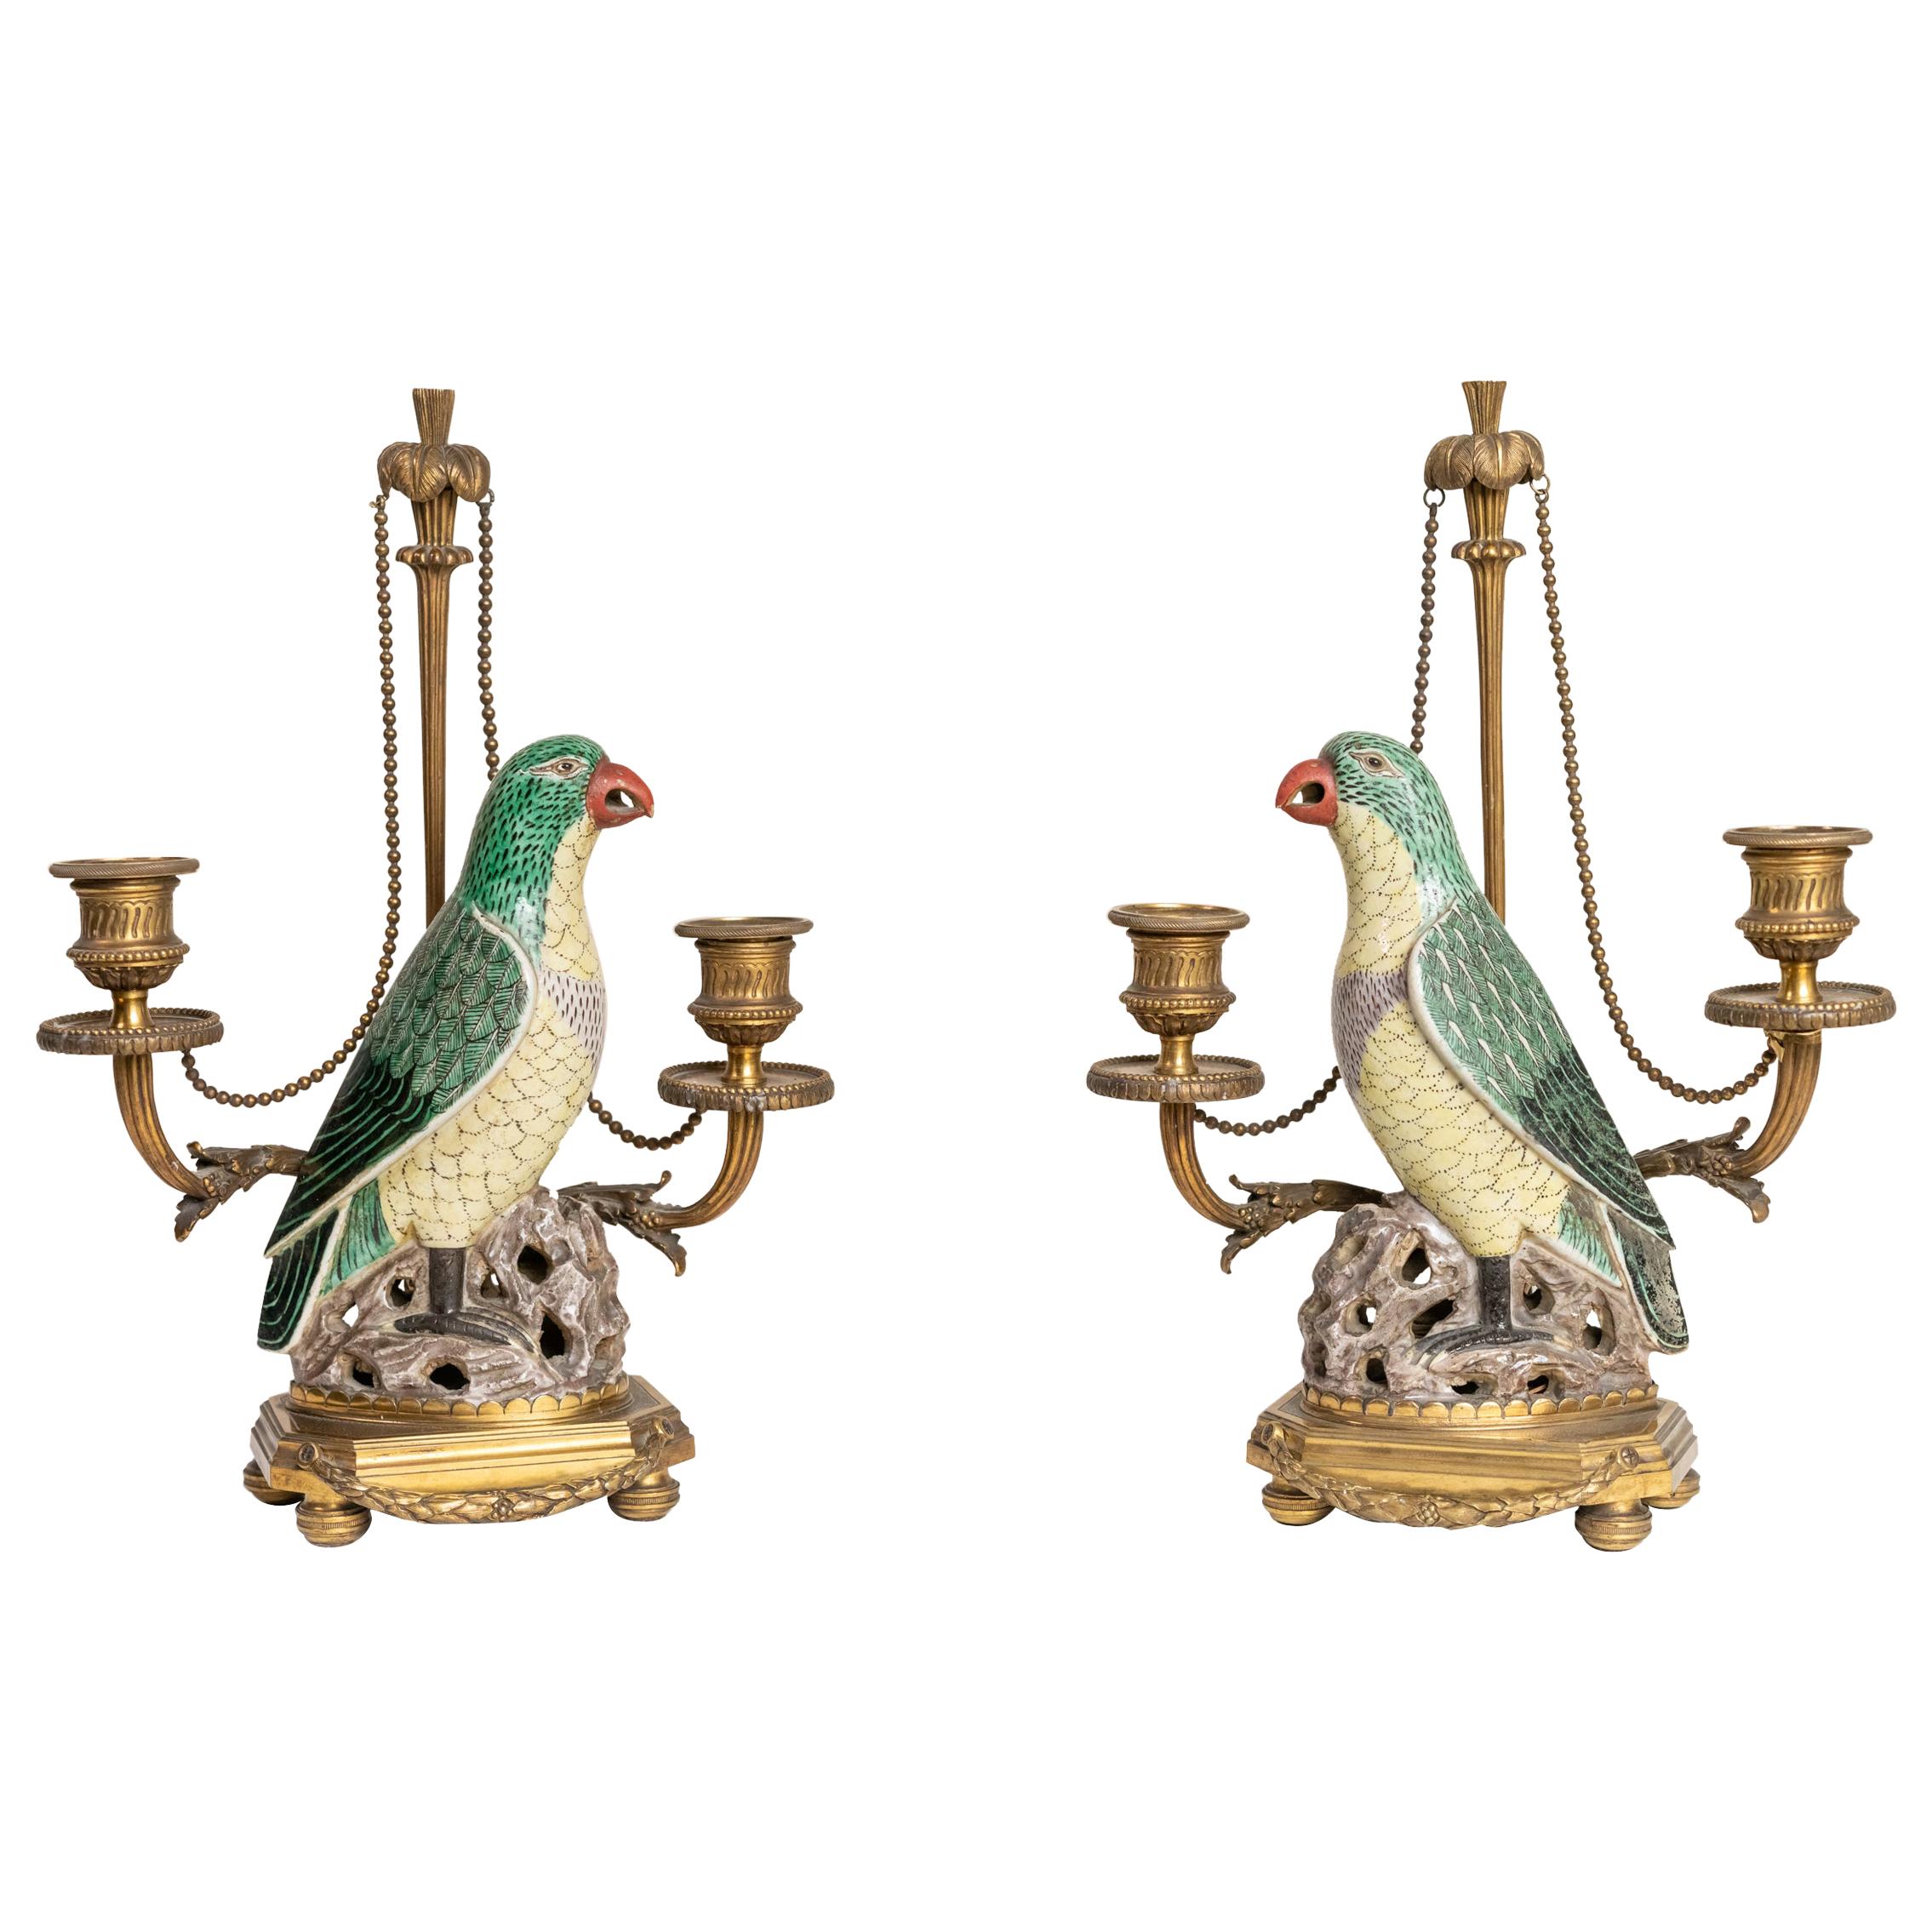 Rare Pair of 18th Century-19th Century Chinese Porcelain Parrots Candelabra